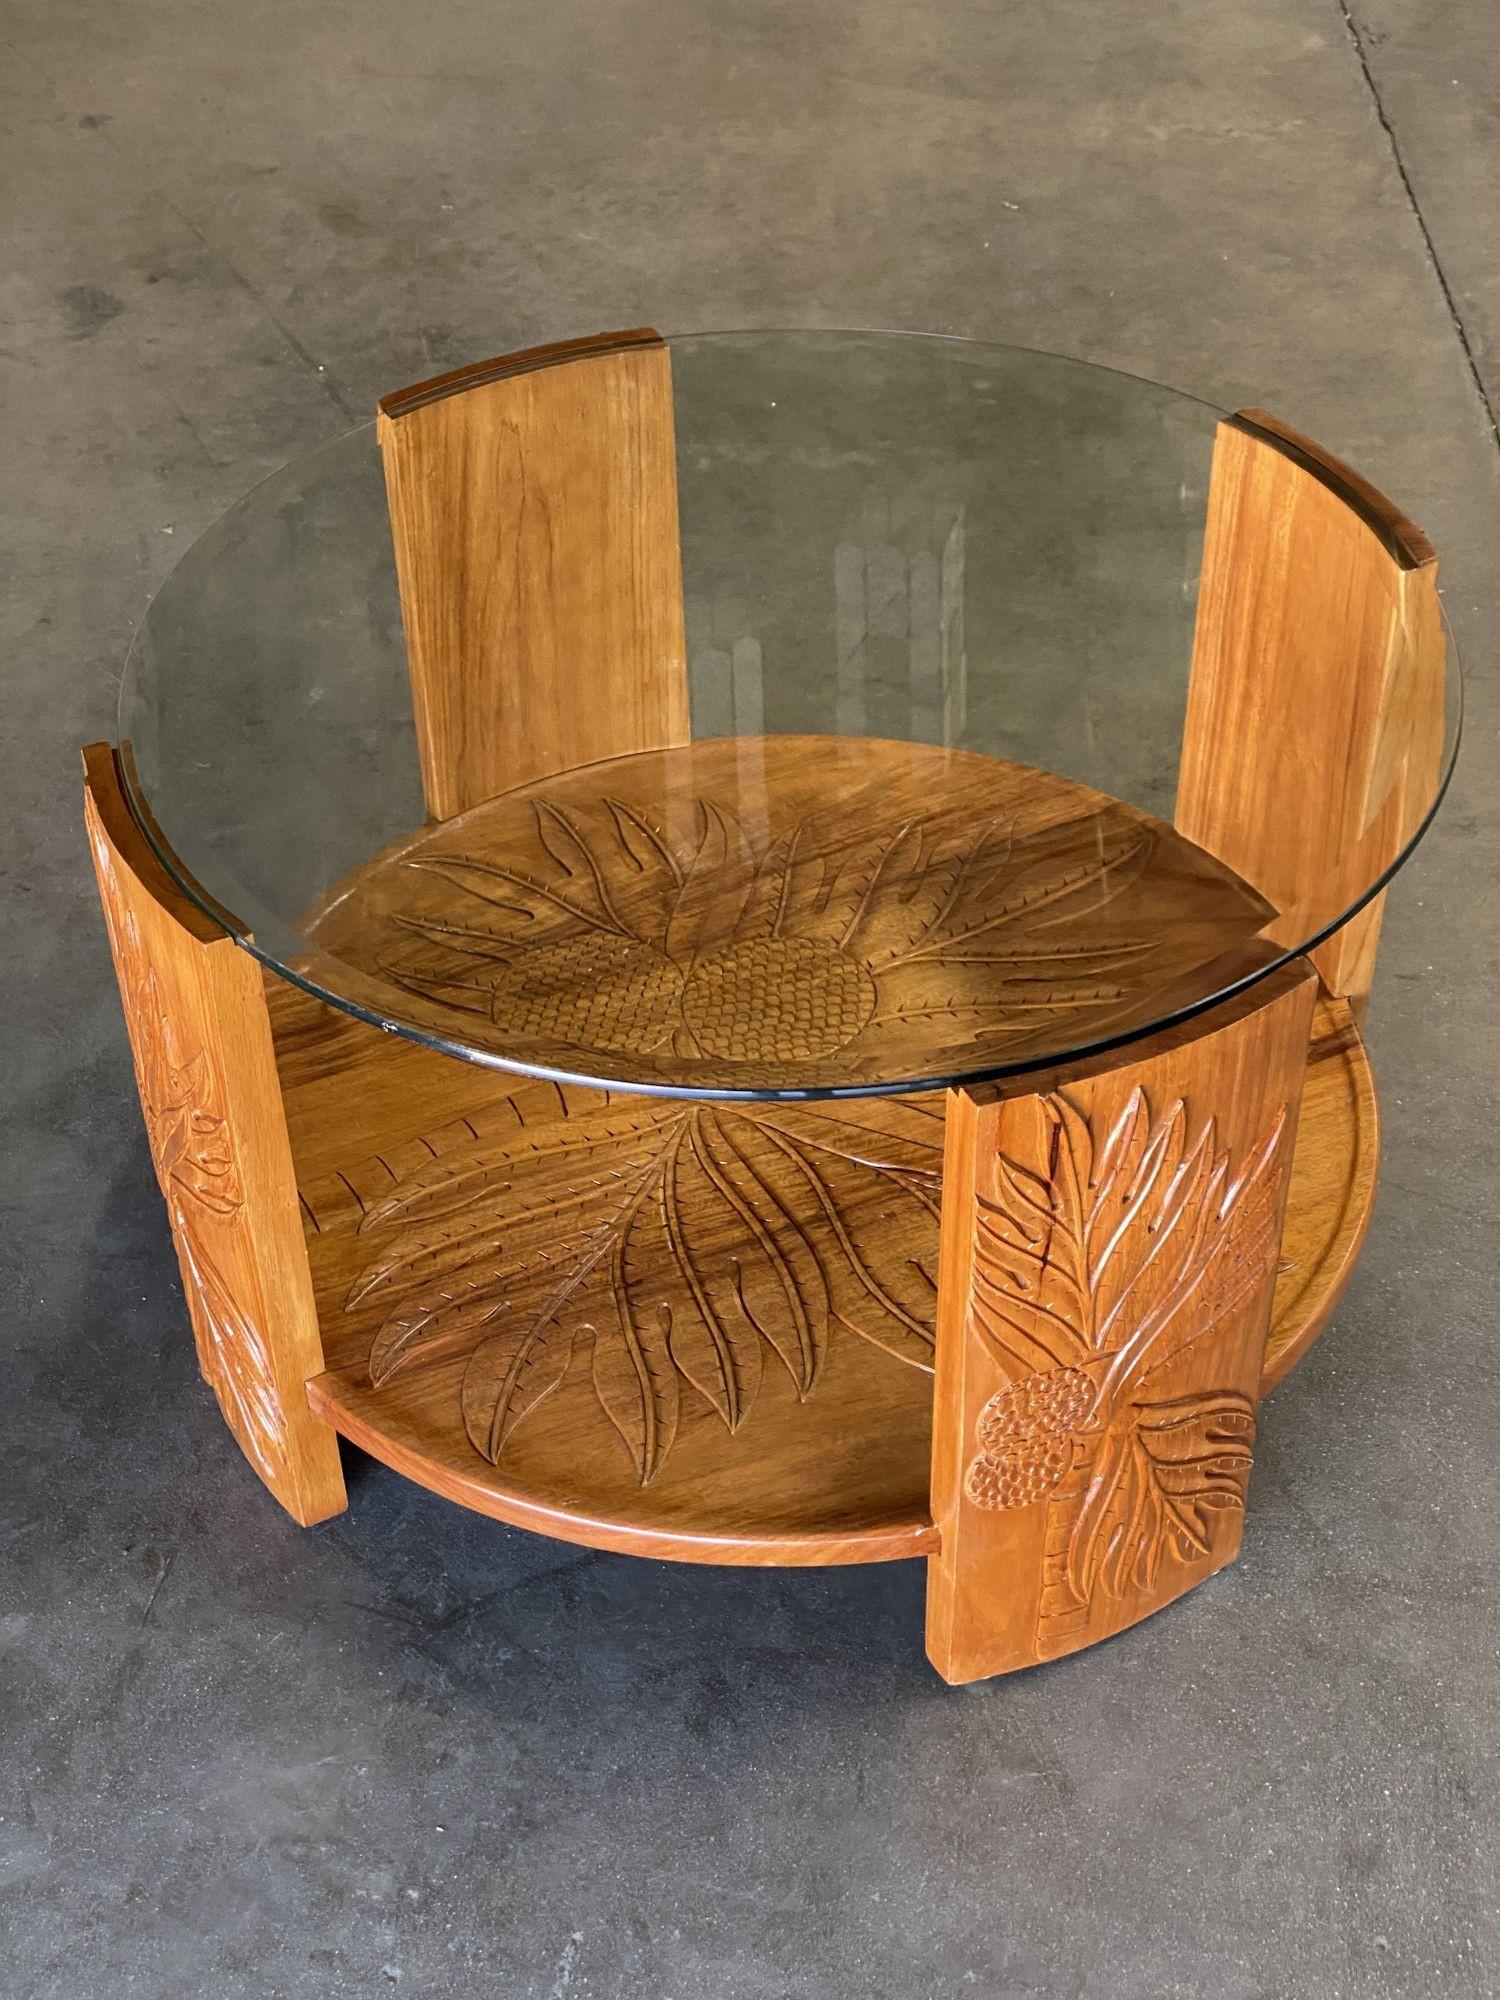 North American Restored Midcentury Hand Carved Palm Pattern Koa Wood Coffee Table w/ Glass Top